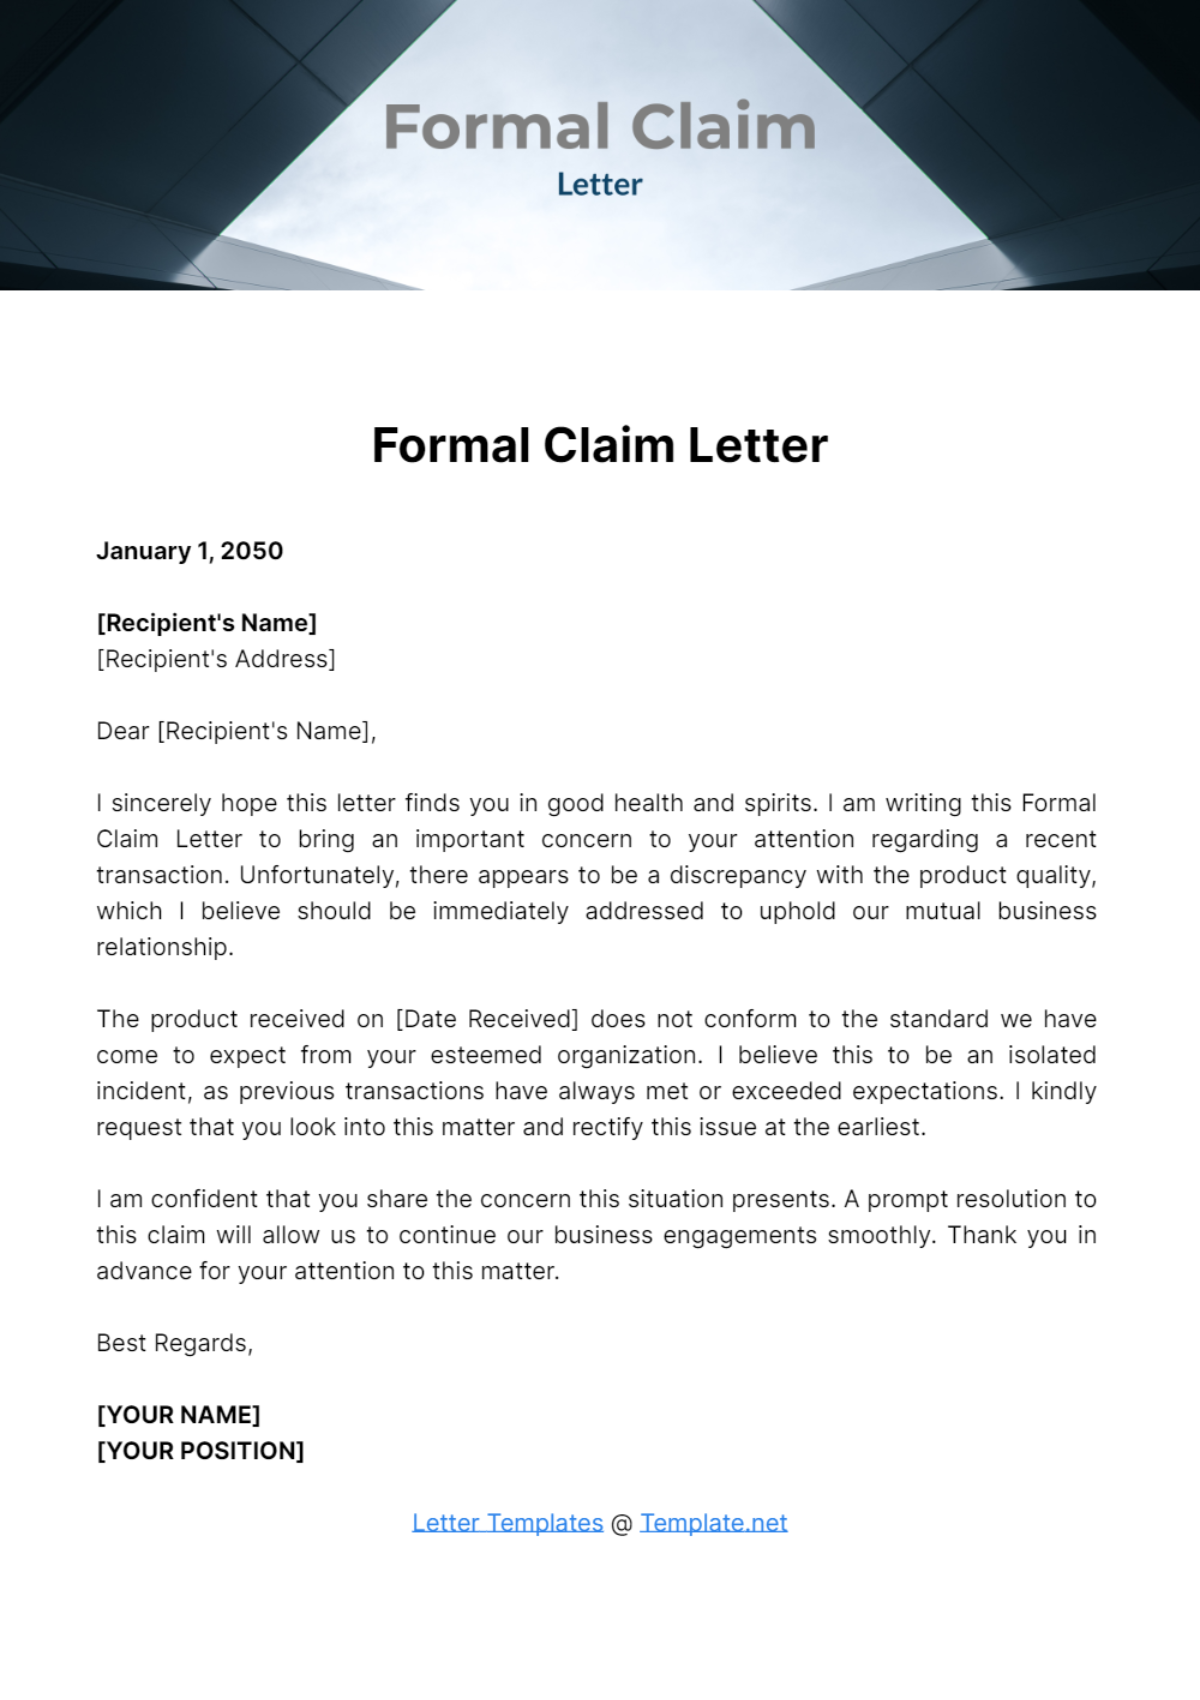 Free Formal Claim Letter Template